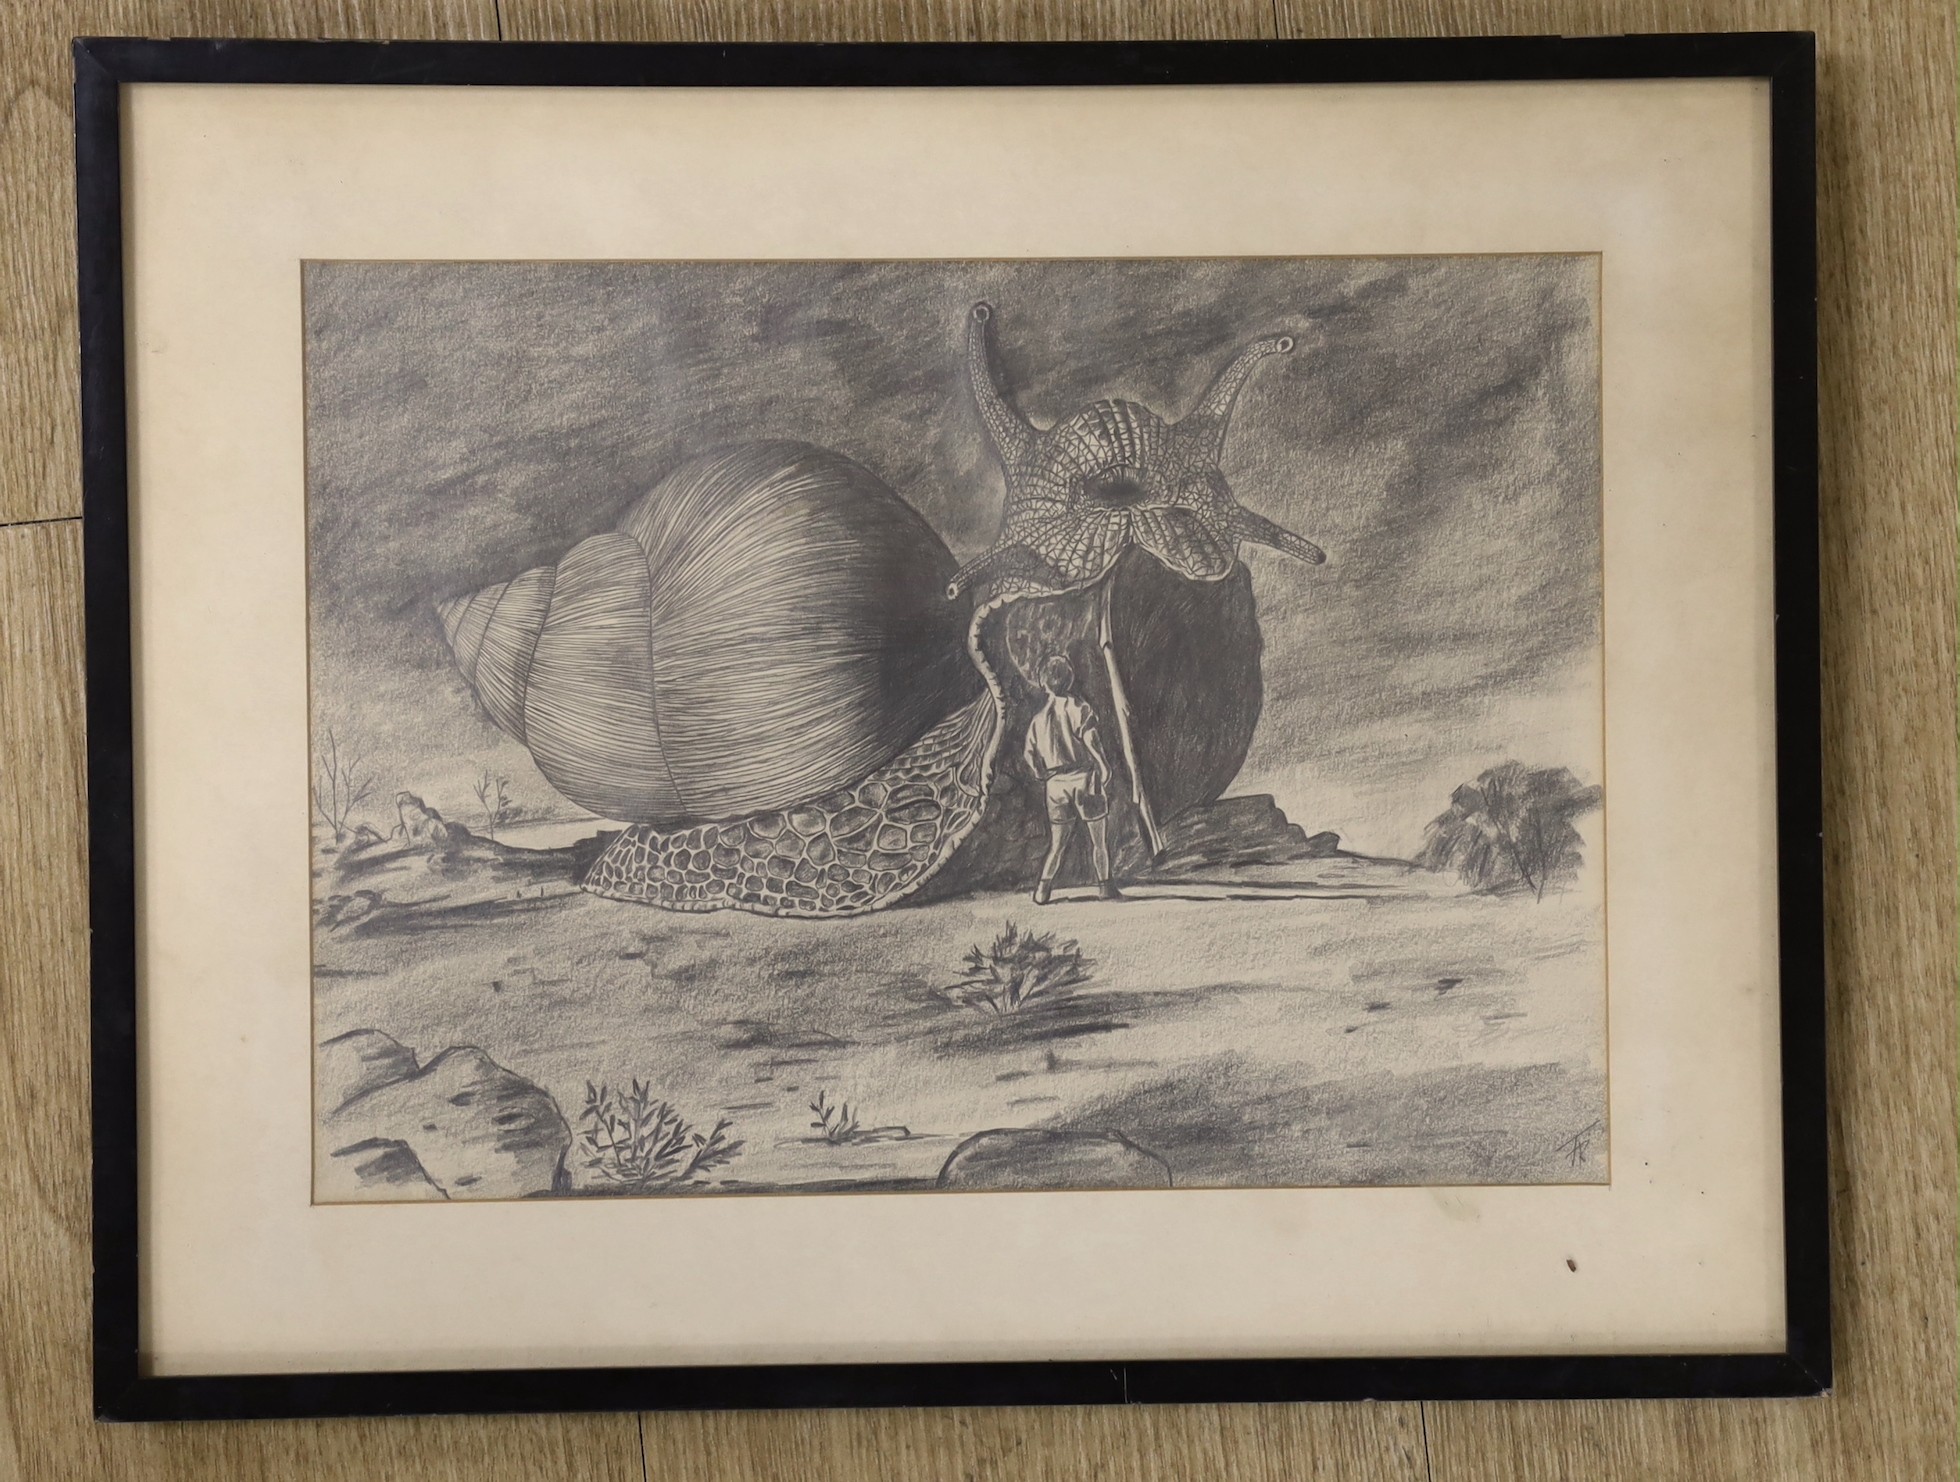 English School, pencil drawing, Science fiction scene; man and giant snail, monogrammed FR, 21 x 29cm